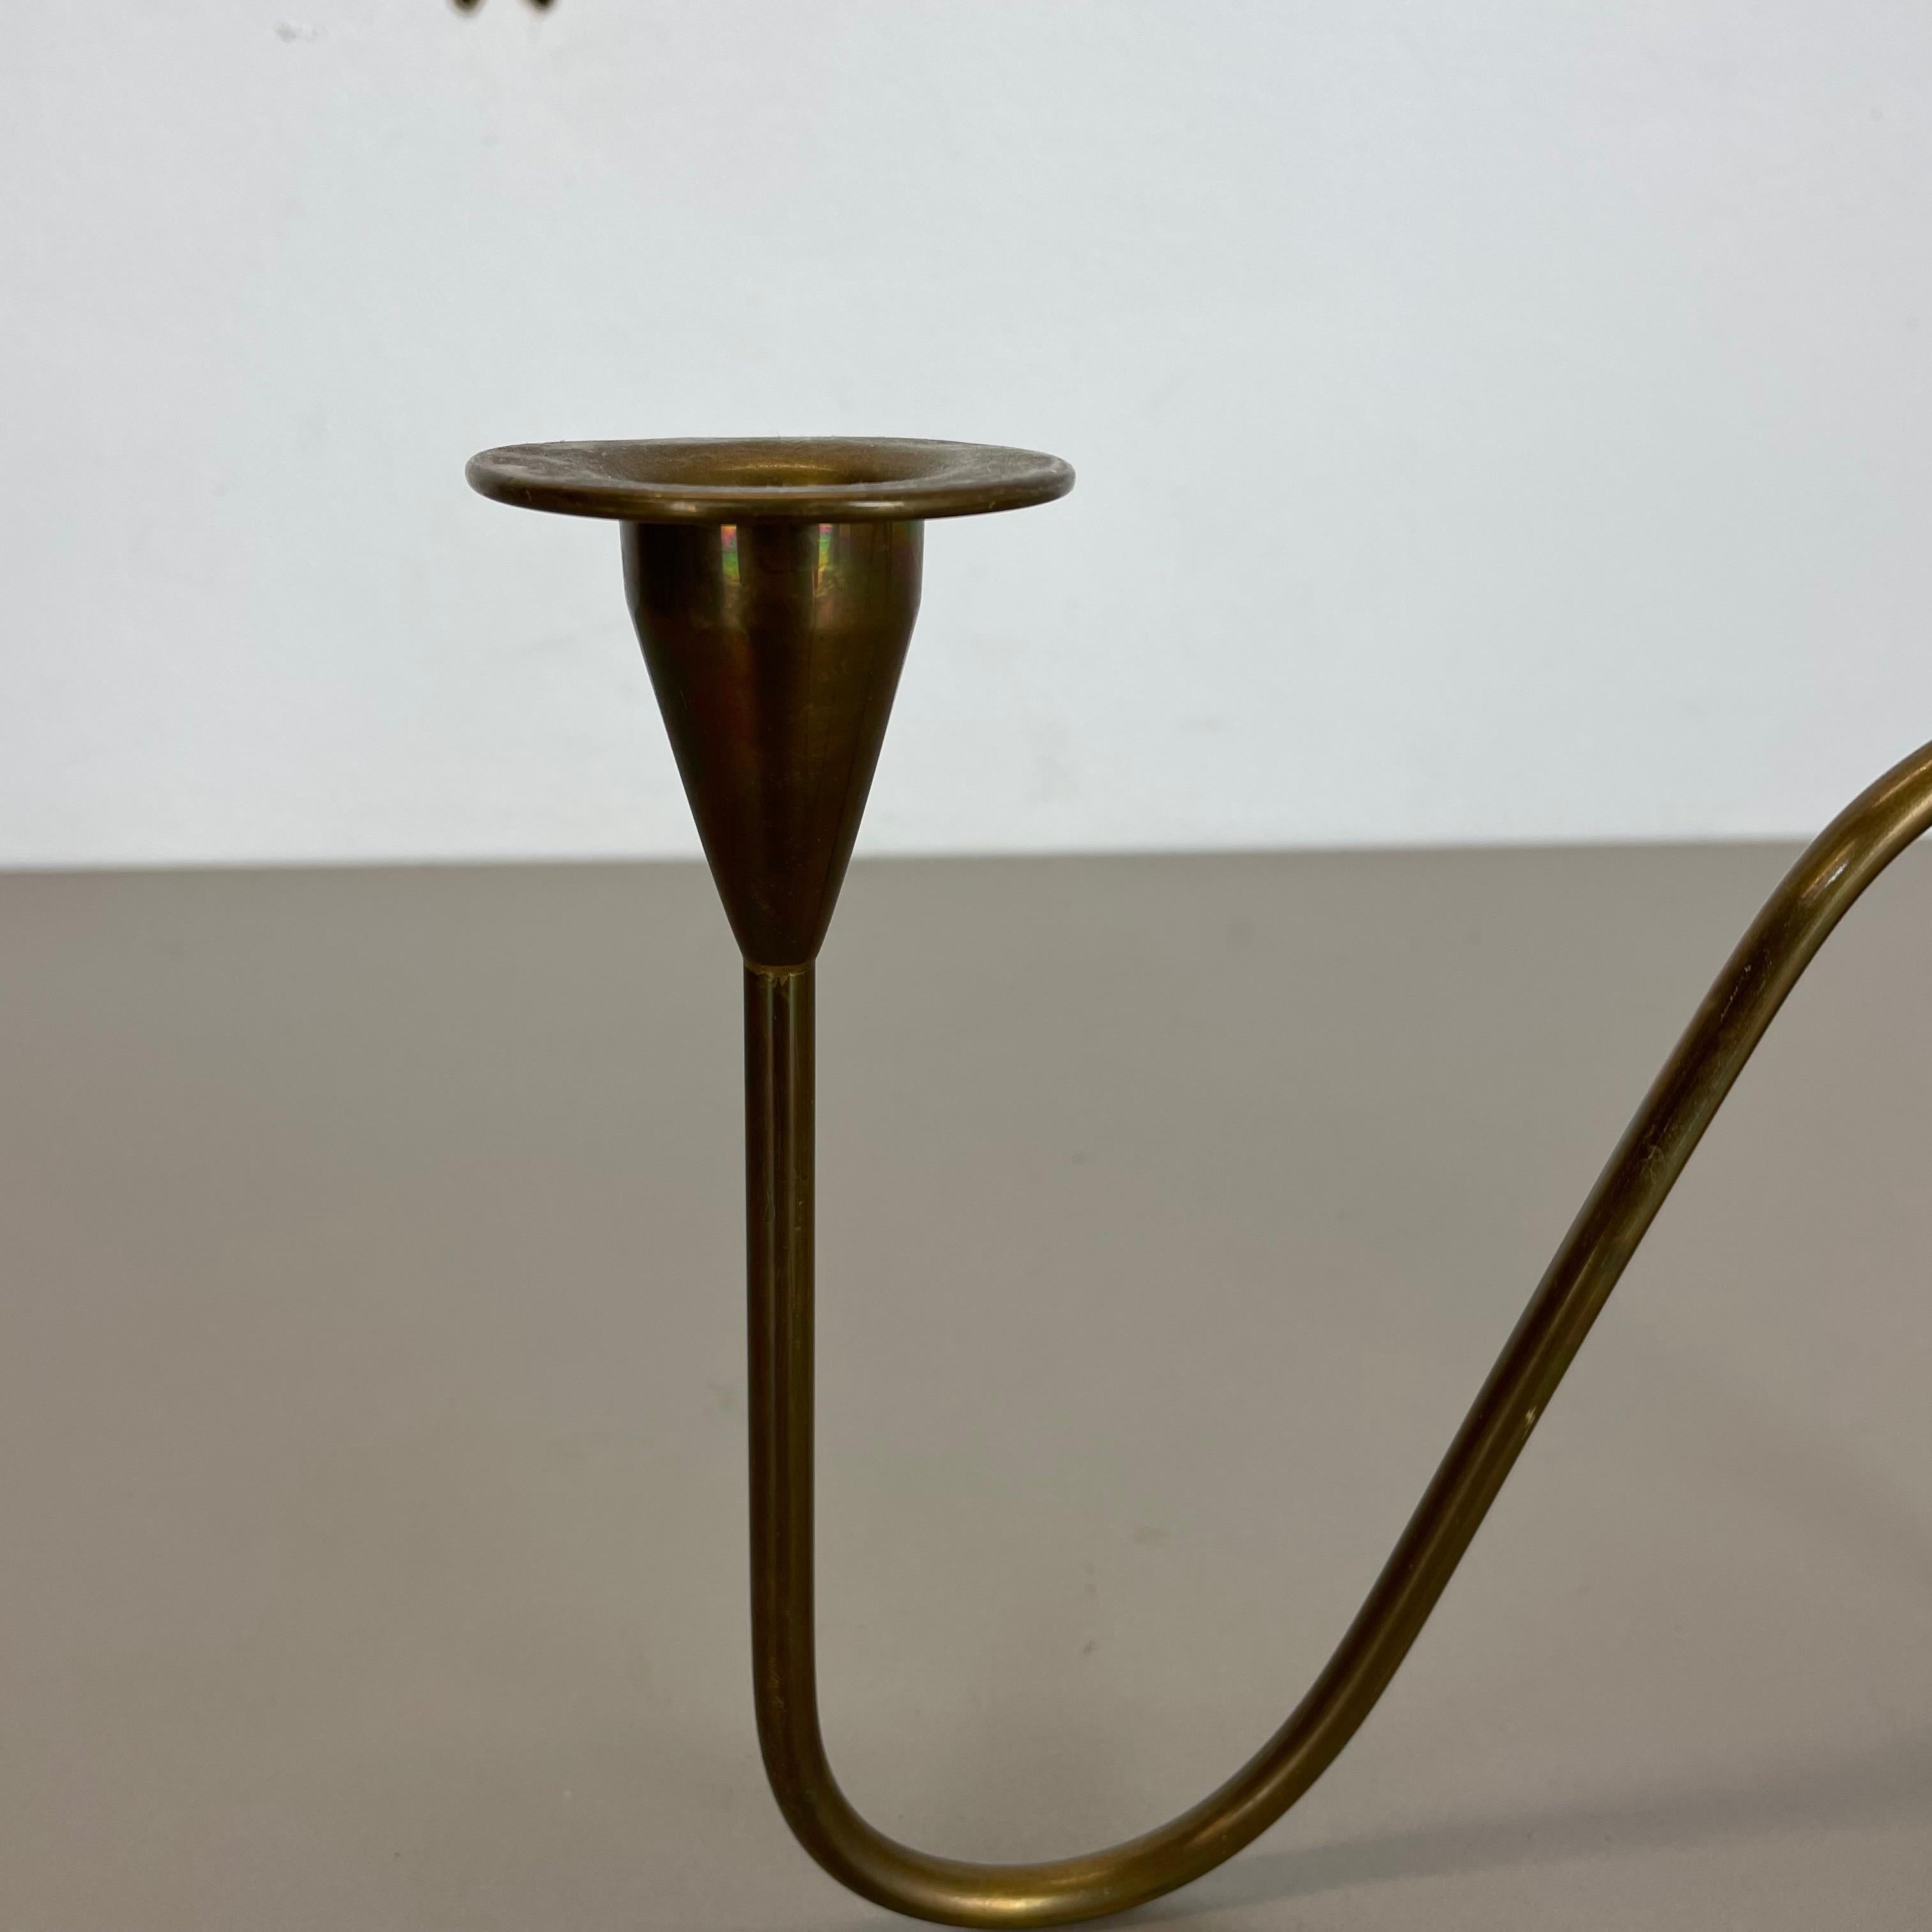 Metal Sculptural Brass Candleholder Object by Günter Kupetz for WMF, Germany 1950s For Sale